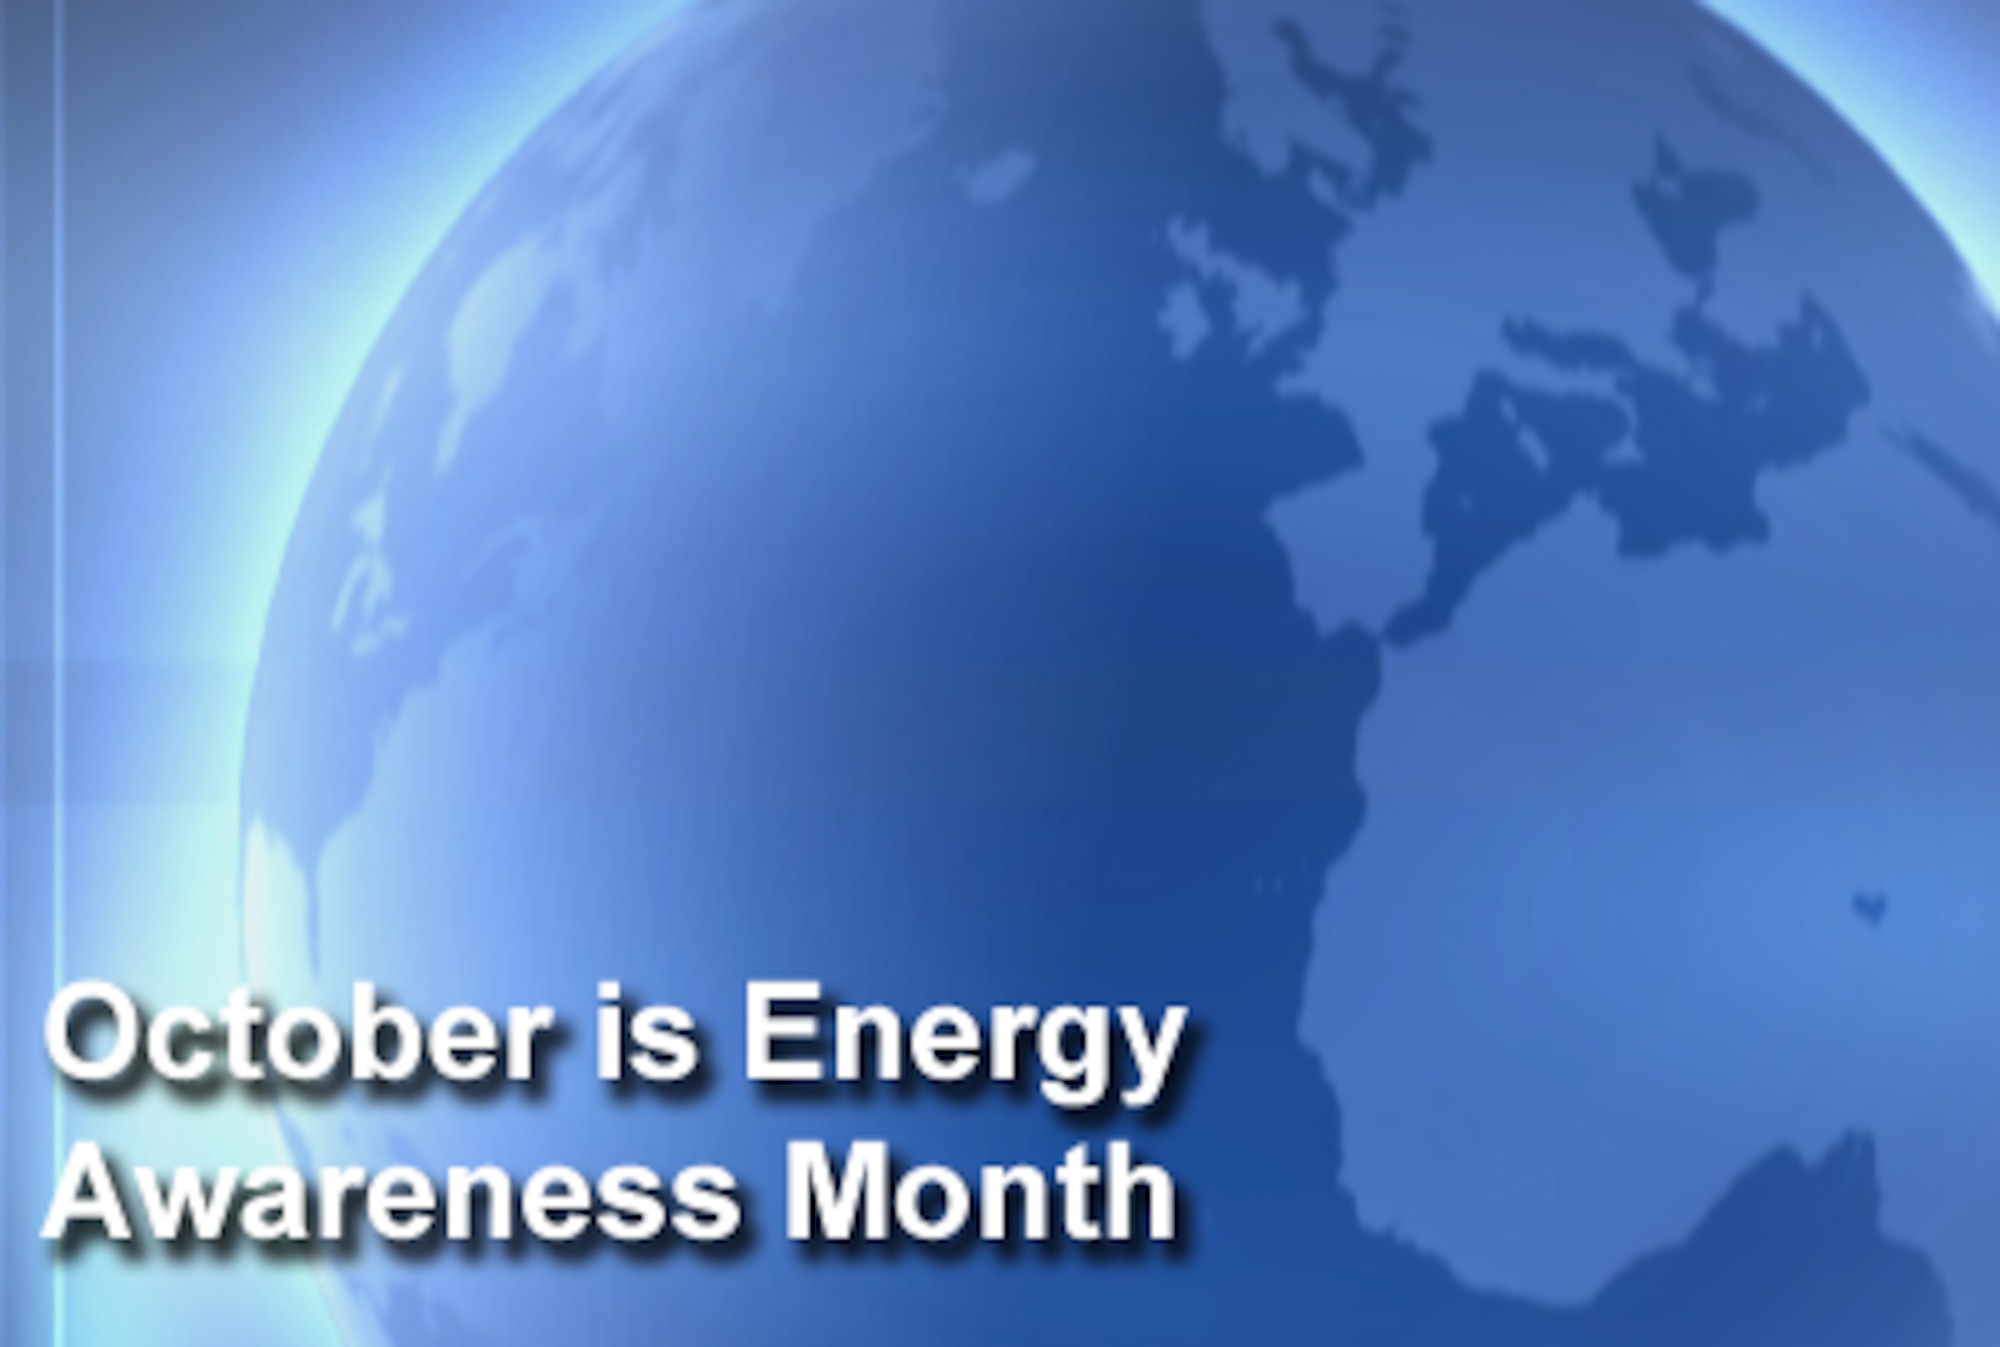 October is Energy Awareness Month throughout the government. The theme is 'Energy Solutions ... Fueling the Mission.' The theme highlights the importance of energy in the overall mission and supports the Air Force strategy to reduce demand, increase supply and change the culture. (U.S. Air Force graphic)